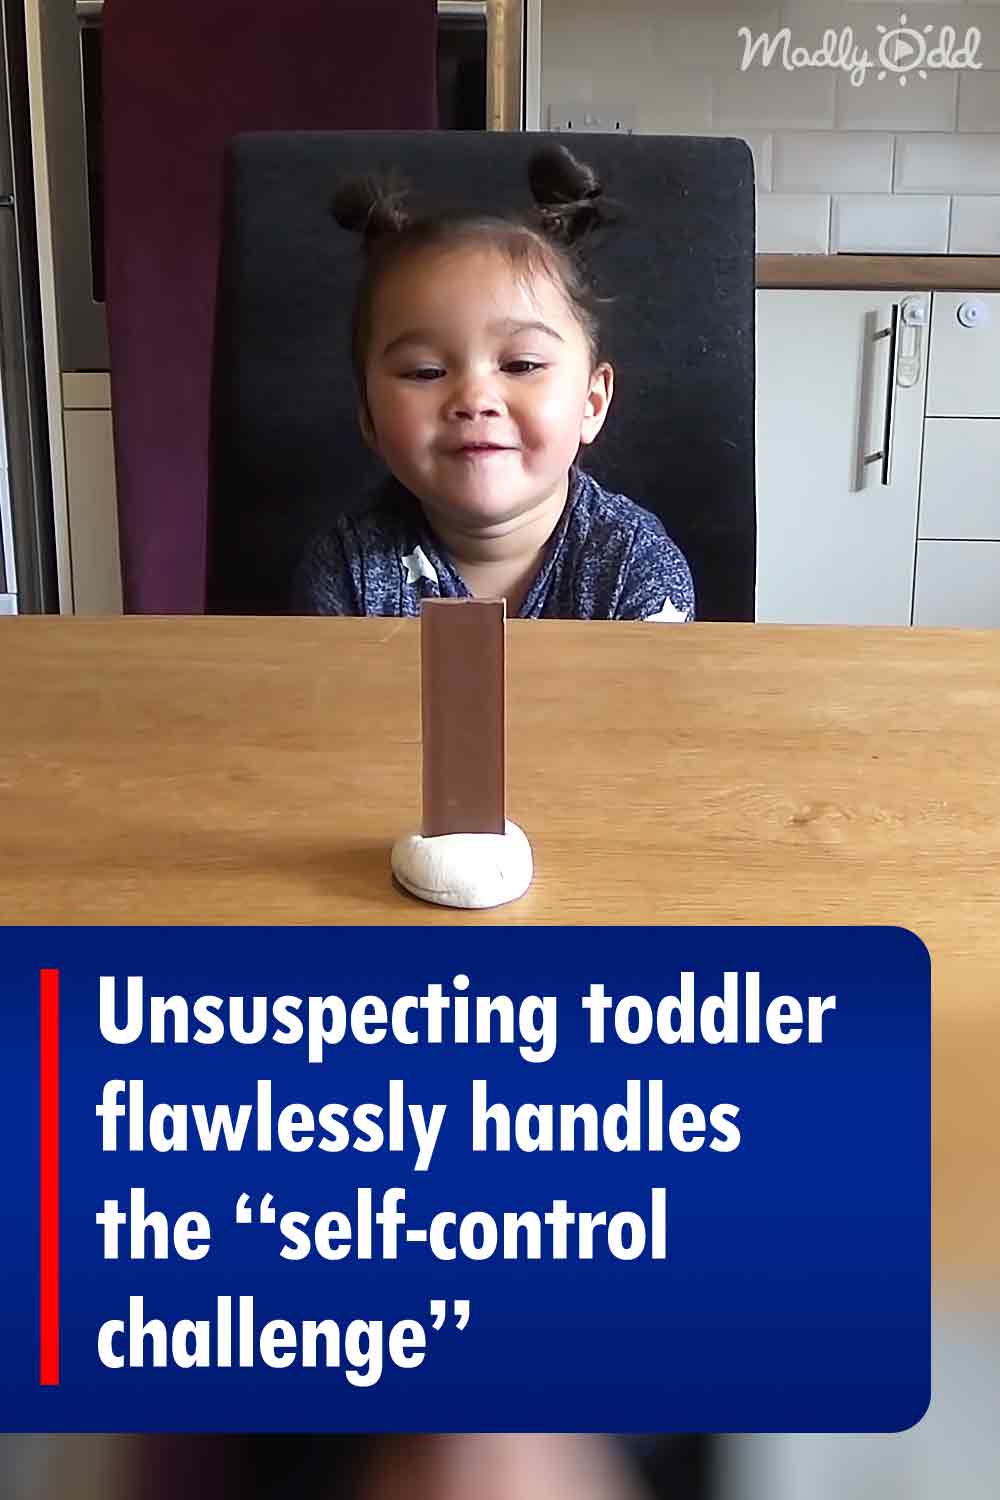 Unsuspecting toddler flawlessly handles the “self-control challenge”